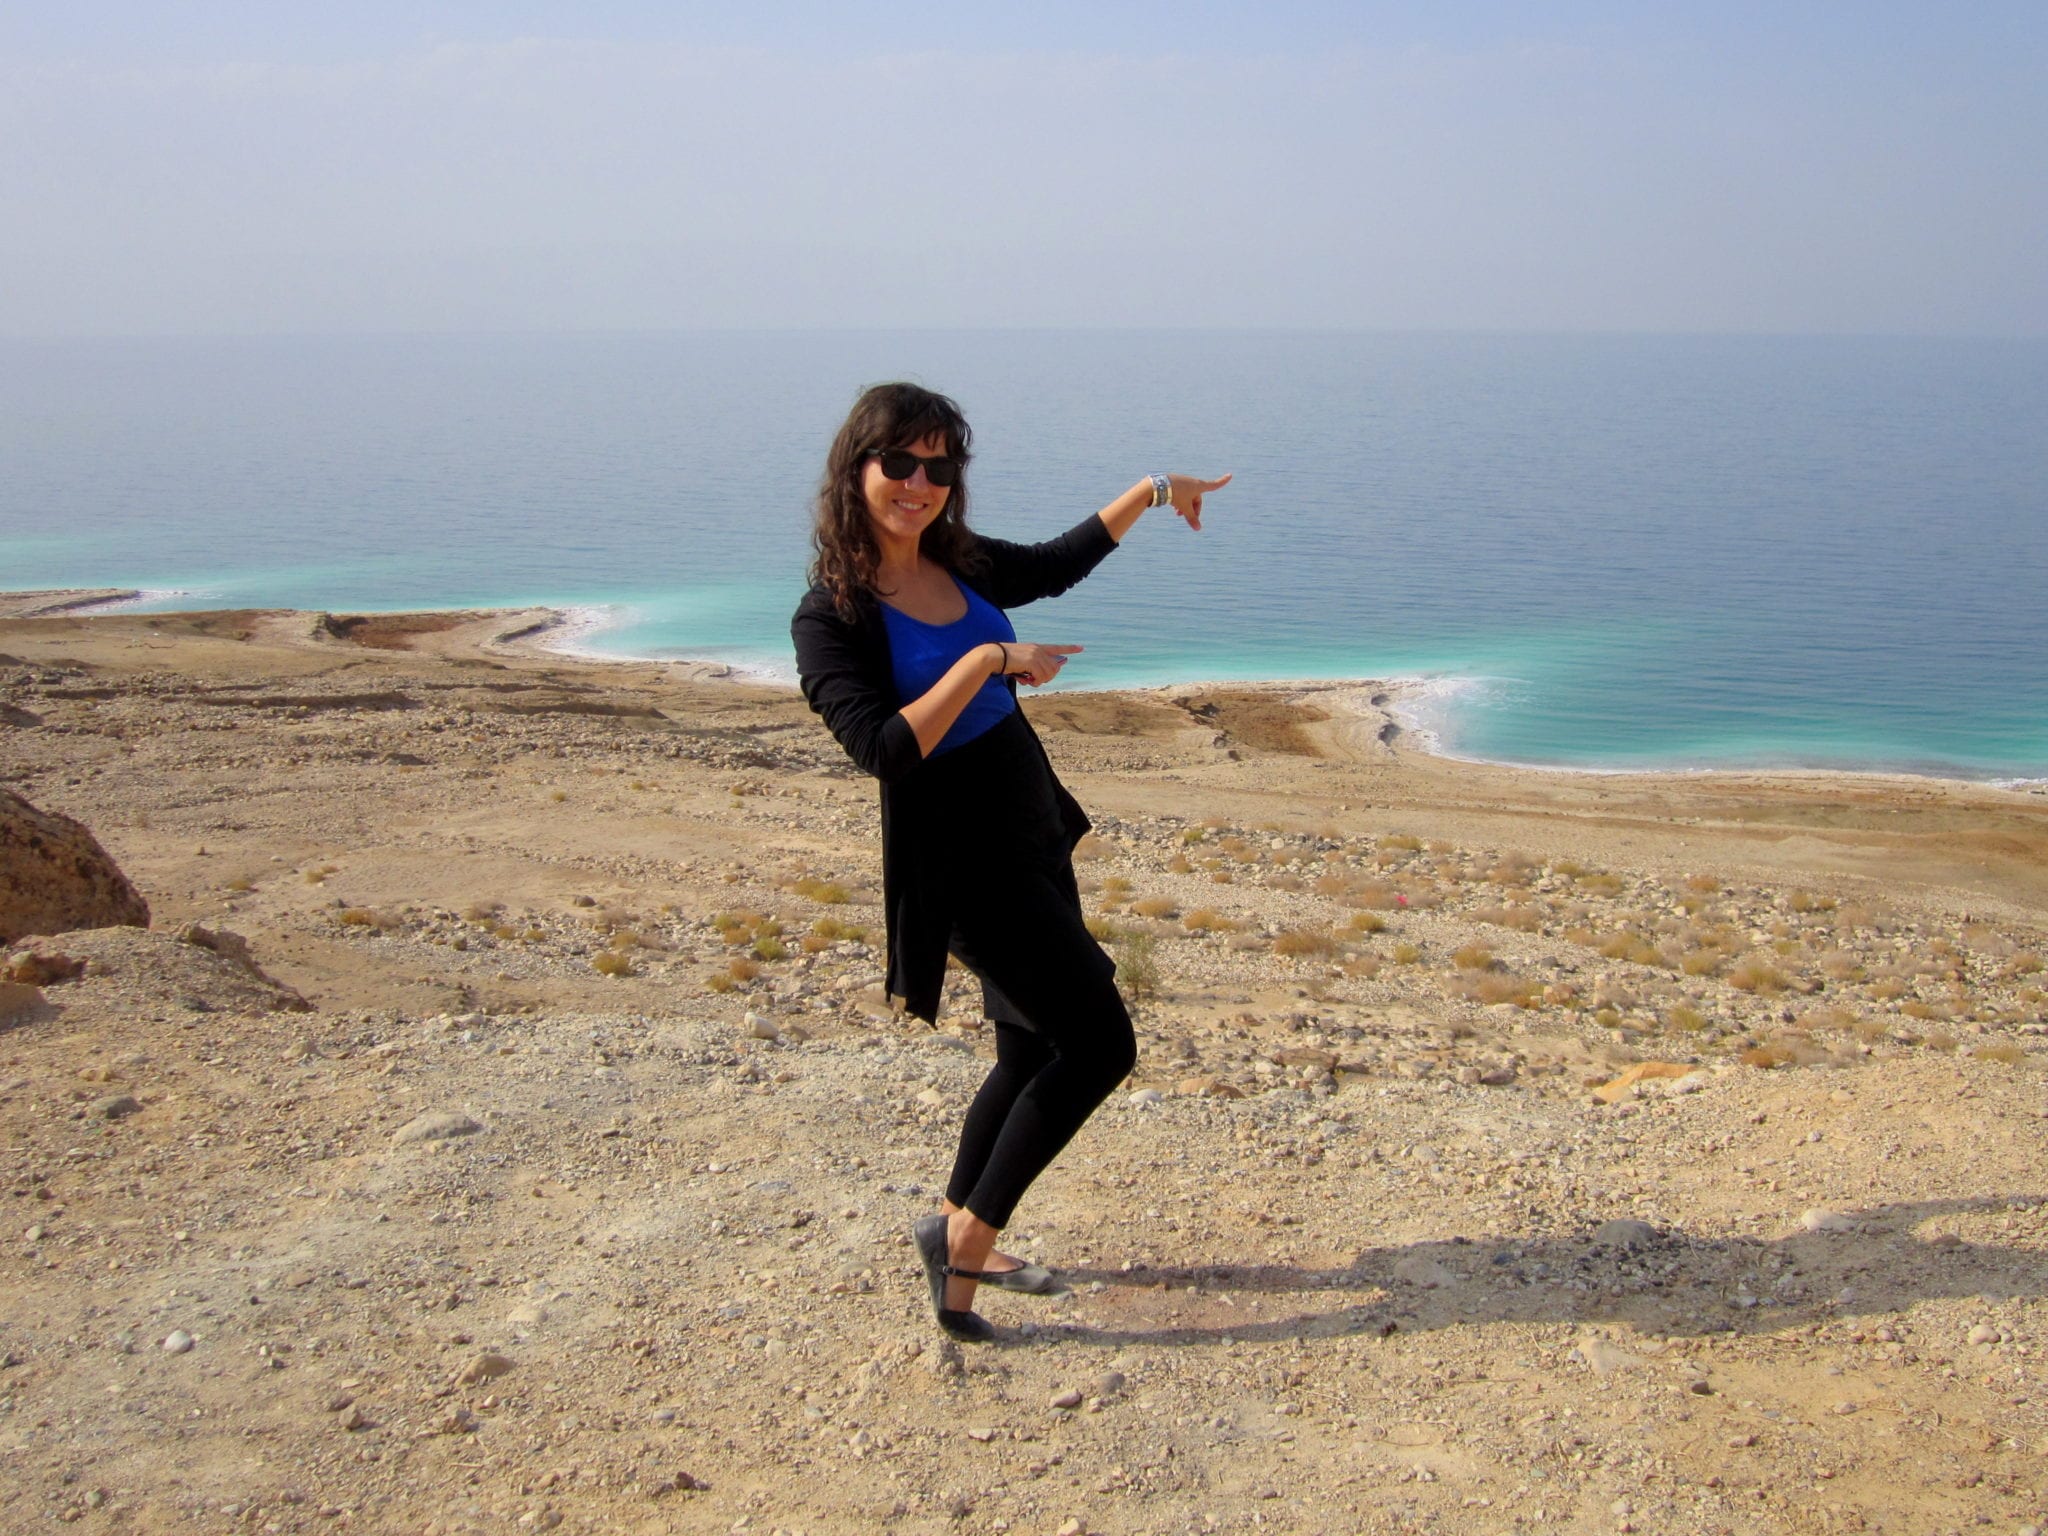 Kate at the Dead Sea